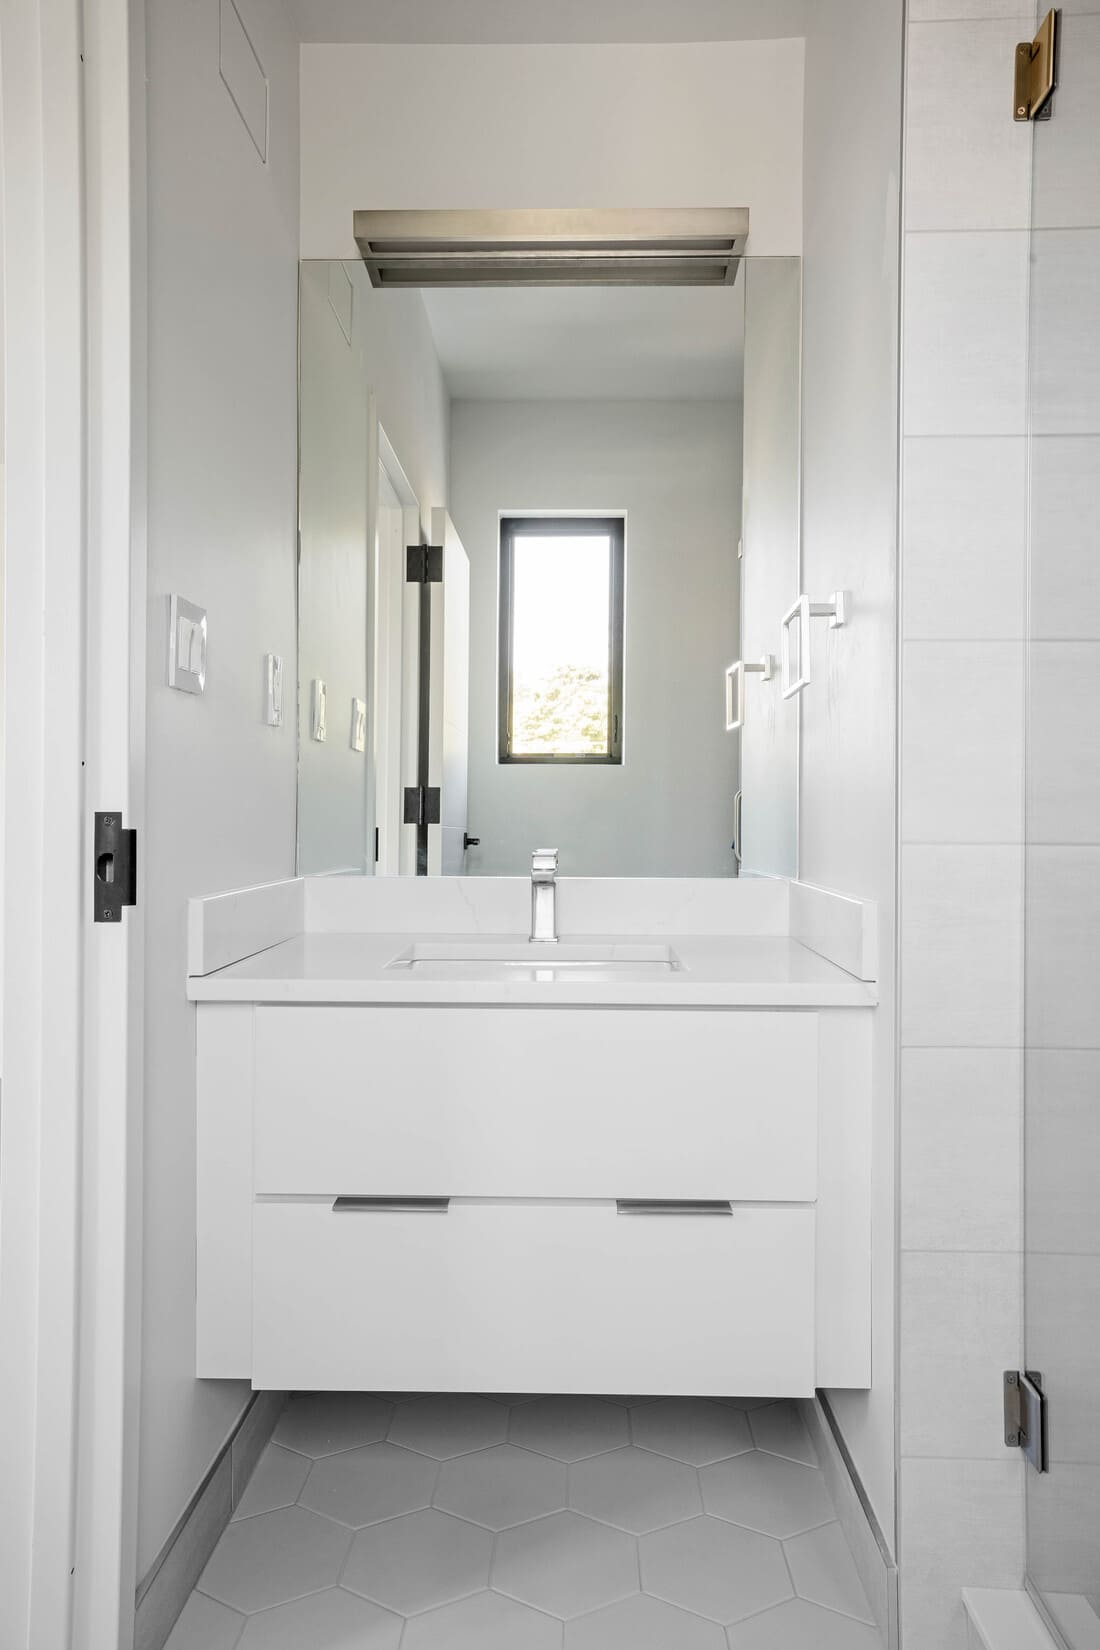 View of sink in high-end custom bathroom with white hexagonal floor tiling